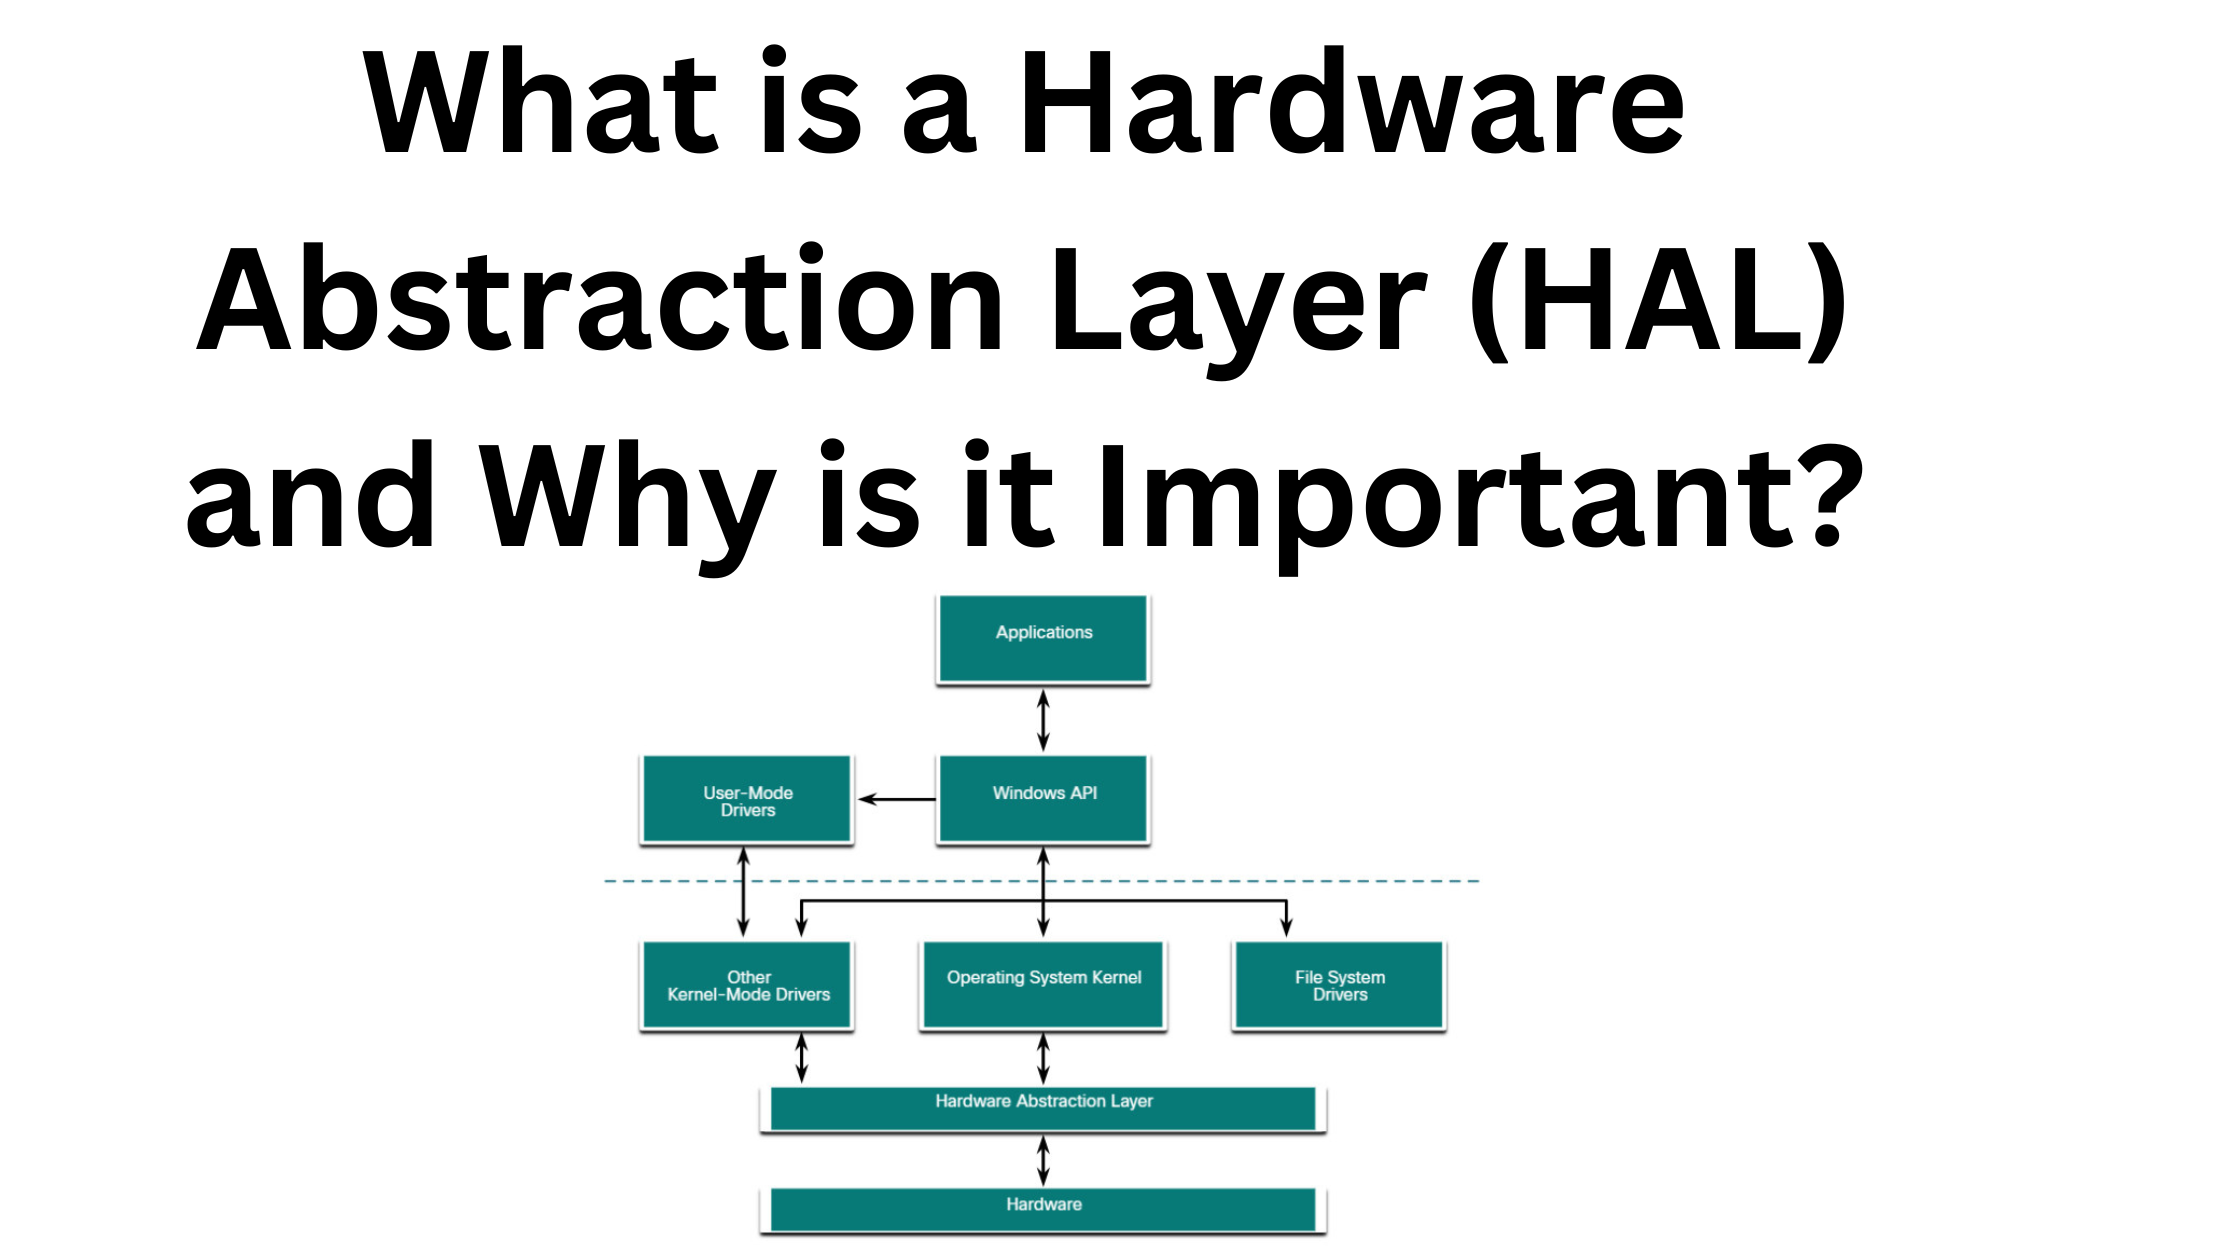 What is a Hardware Abstraction Layer (HAL) and Why is it Important?